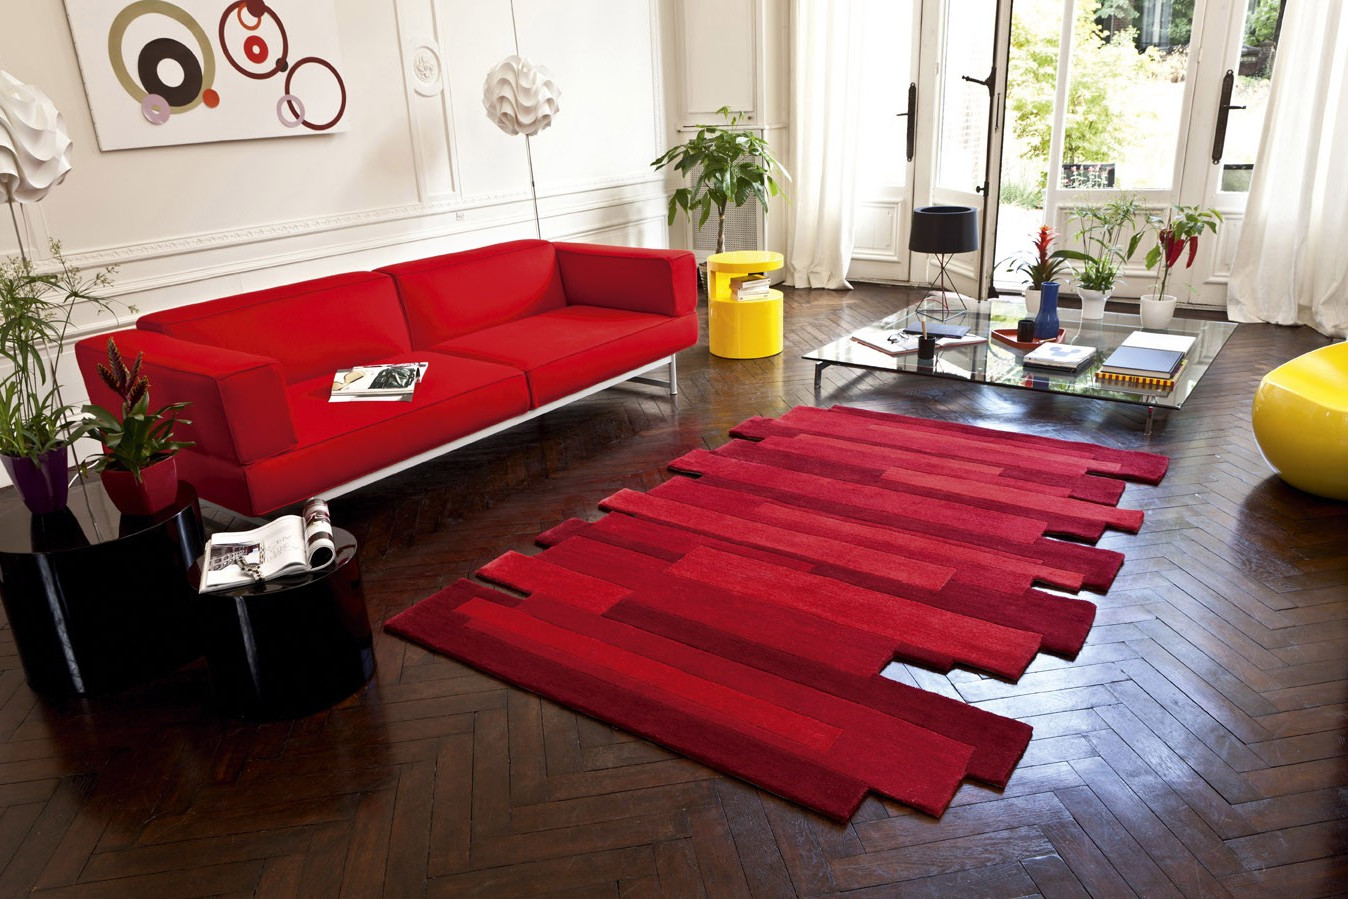 red striped rugs for modern living room ideas